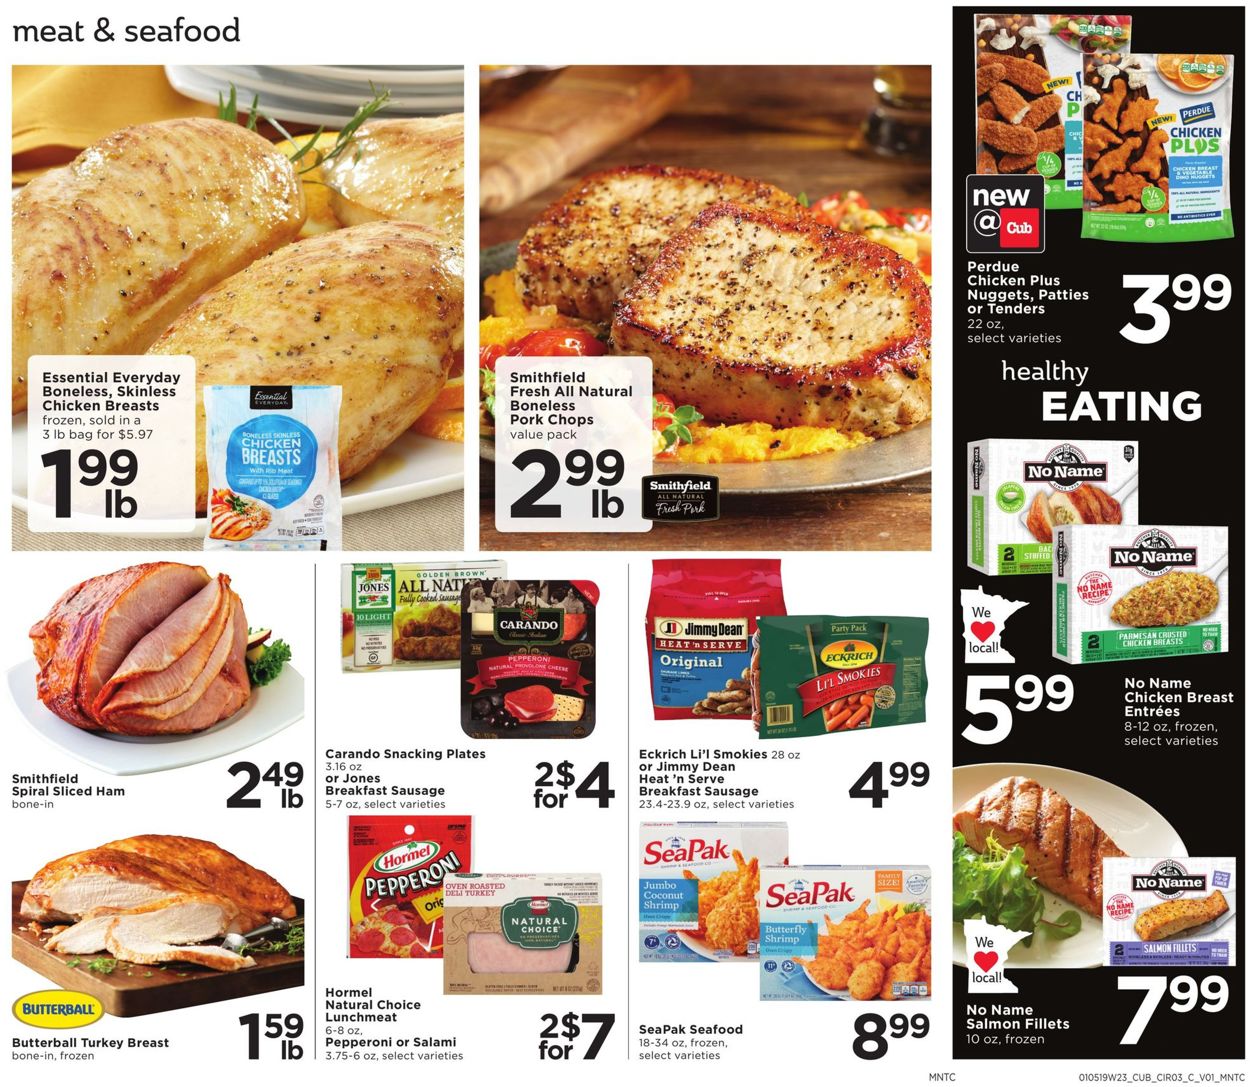 Cub Foods Current weekly ad 01/05